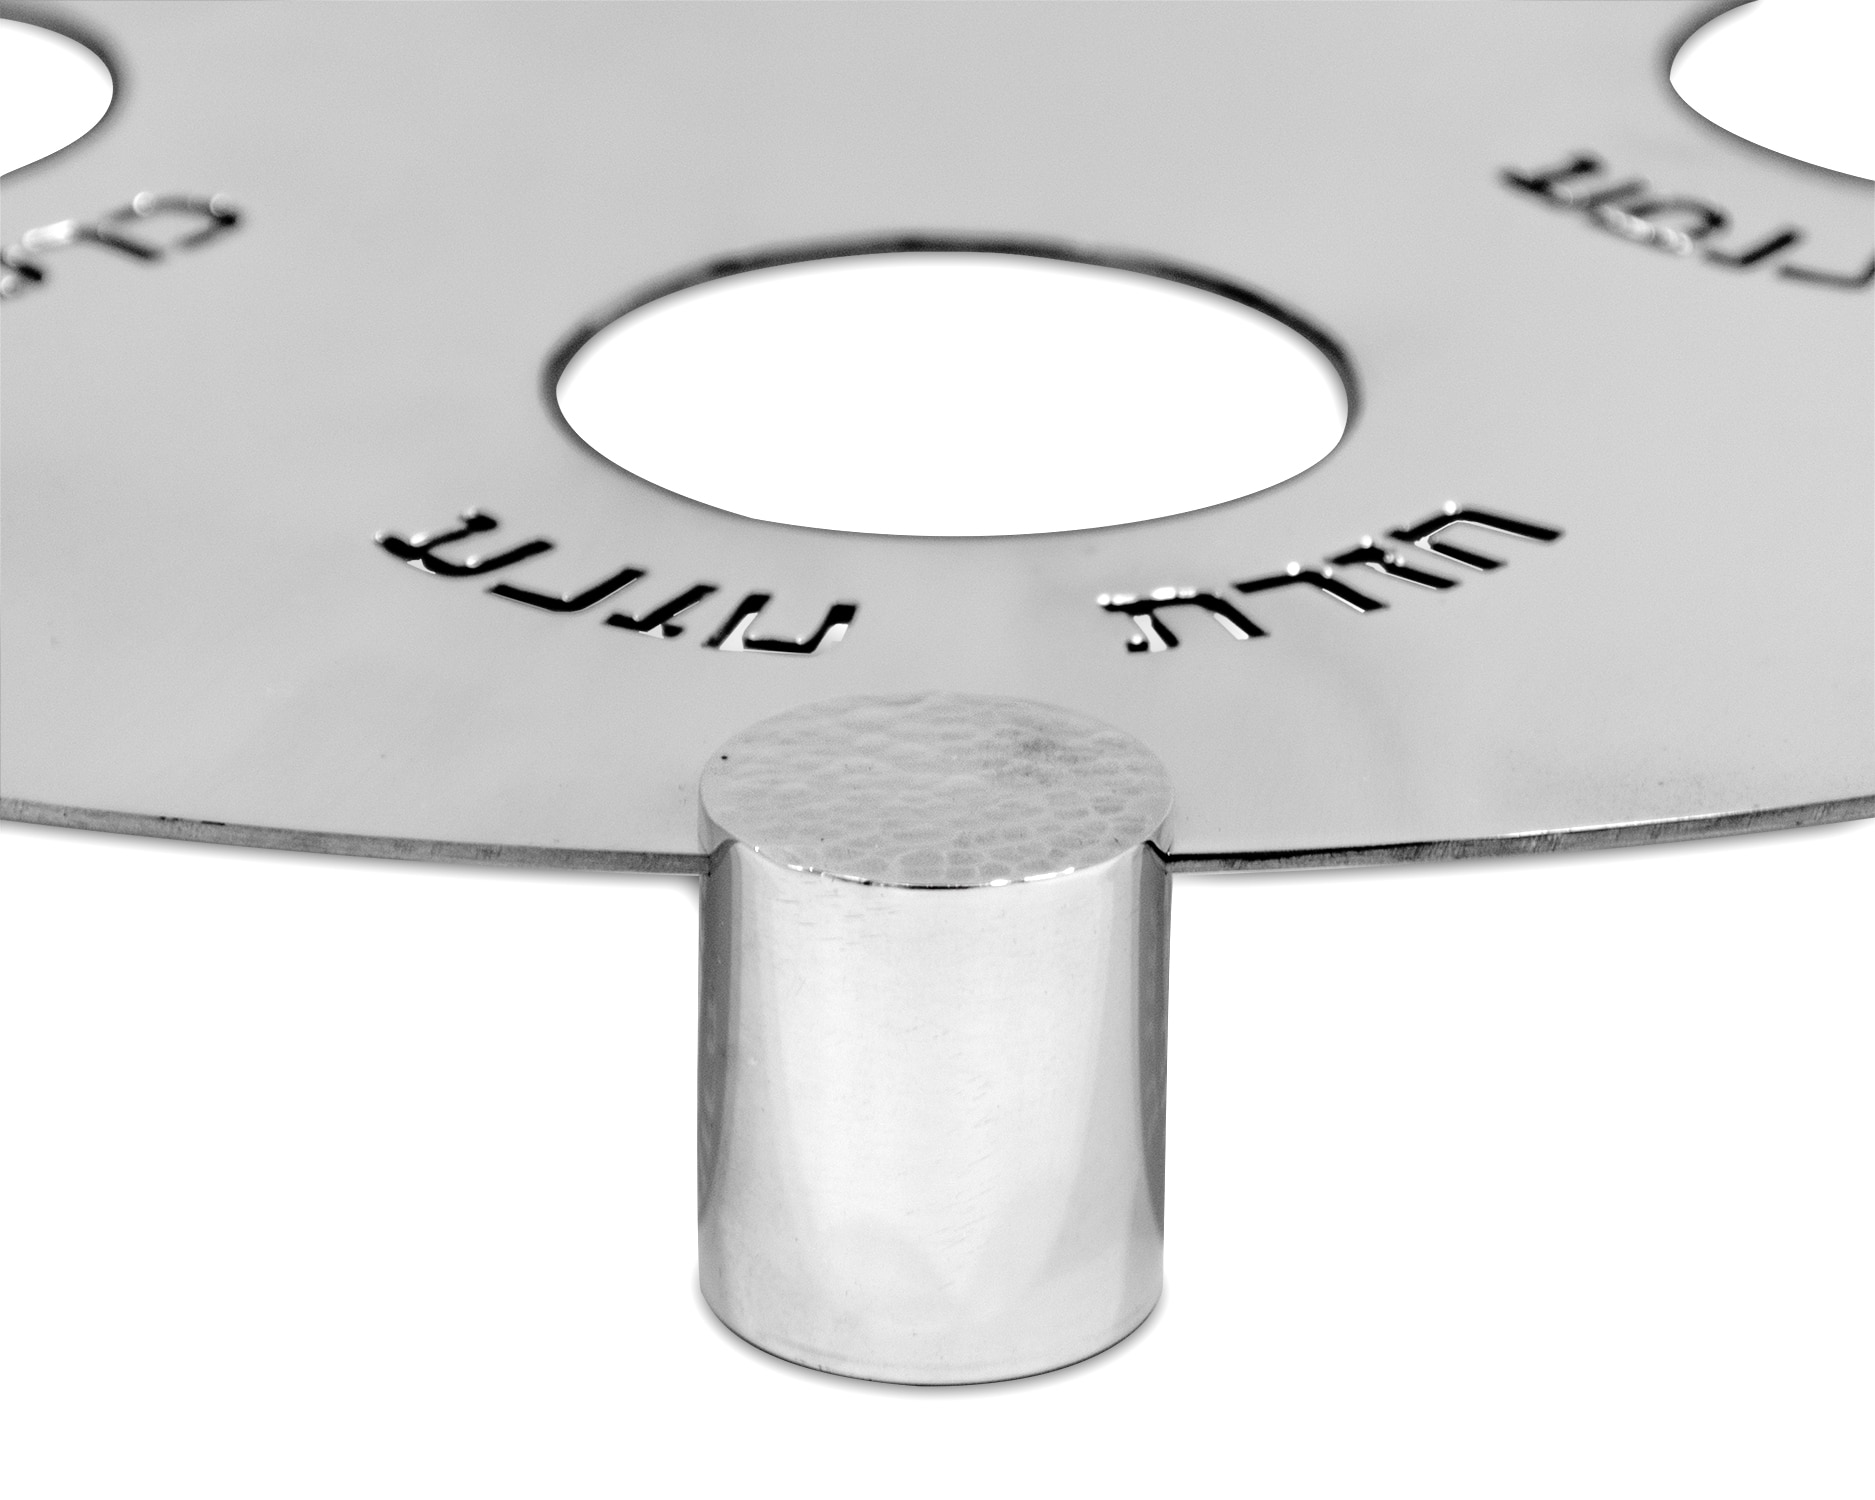 925 Sterling Silver & Aluminum Seder Plate with Cut-Out Design